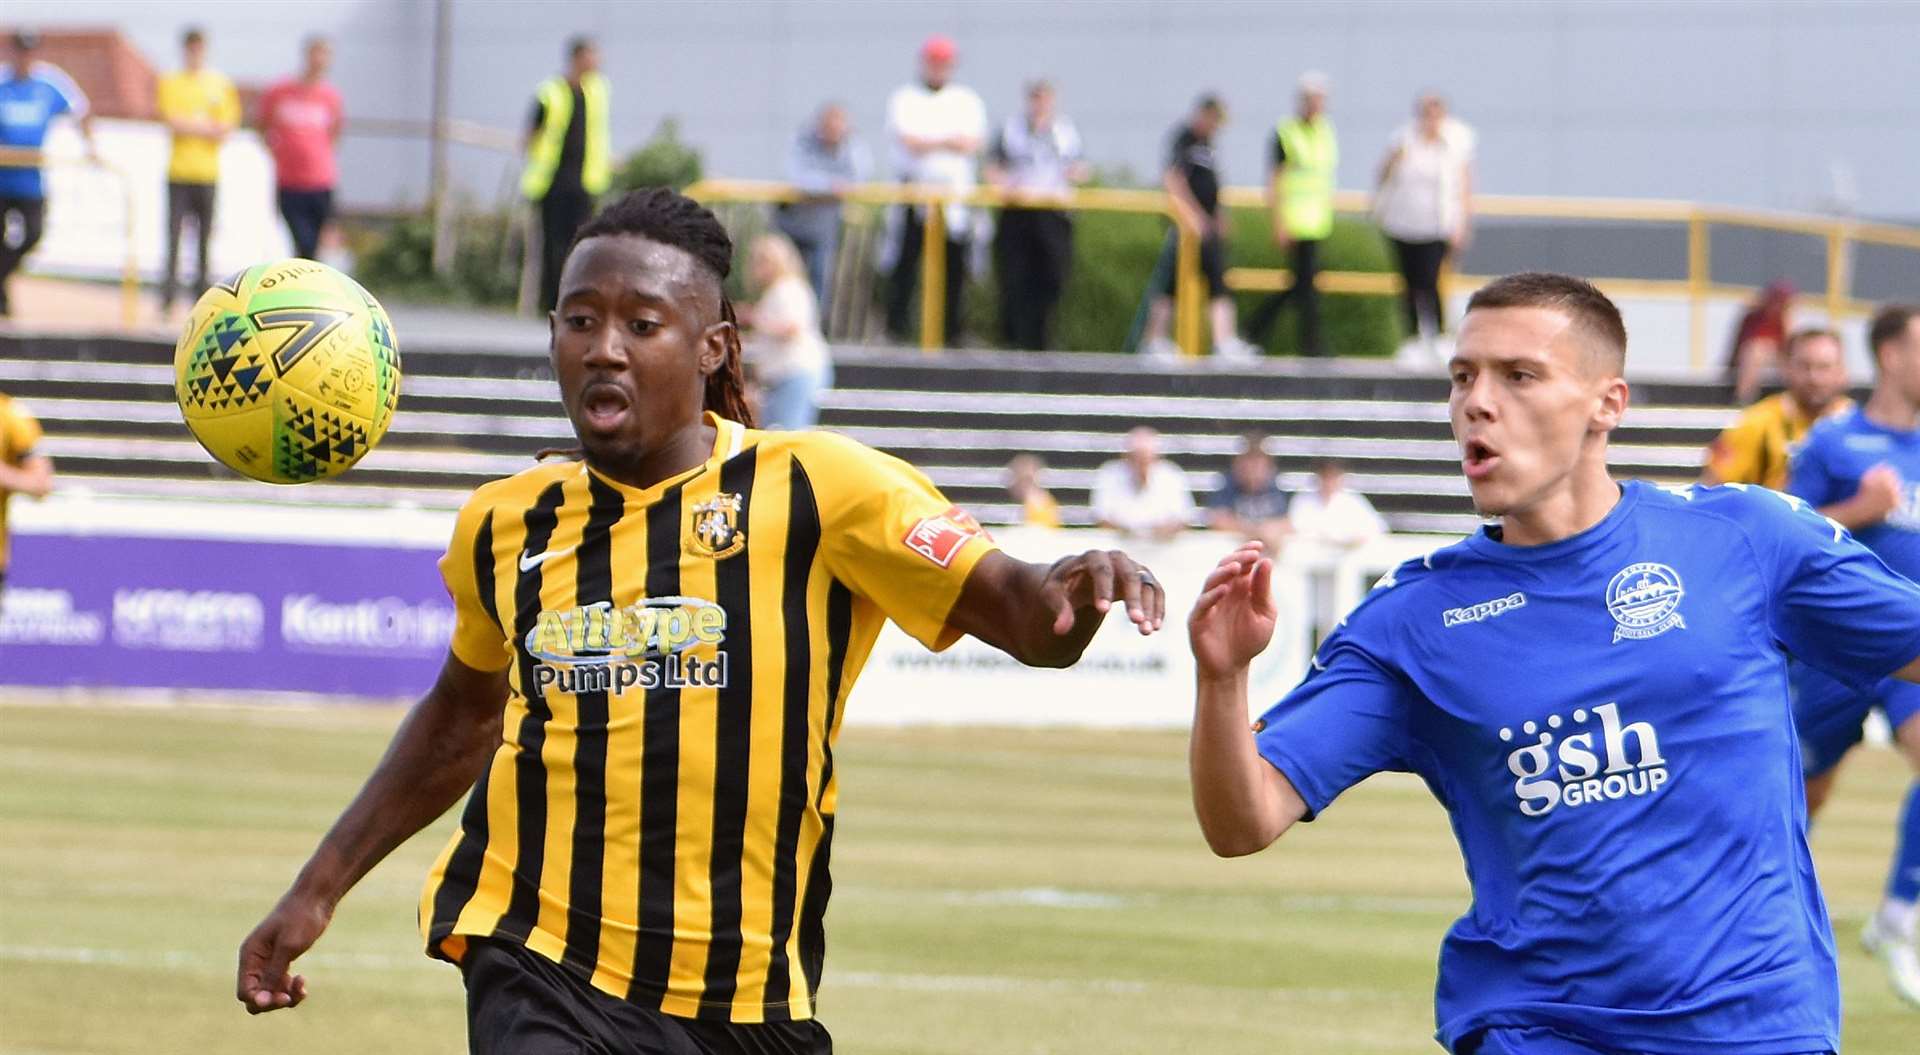 Folkestone's Kadell Daniel, left, scored a stunning goal as they drew at Enfield. Picture: Randolph File